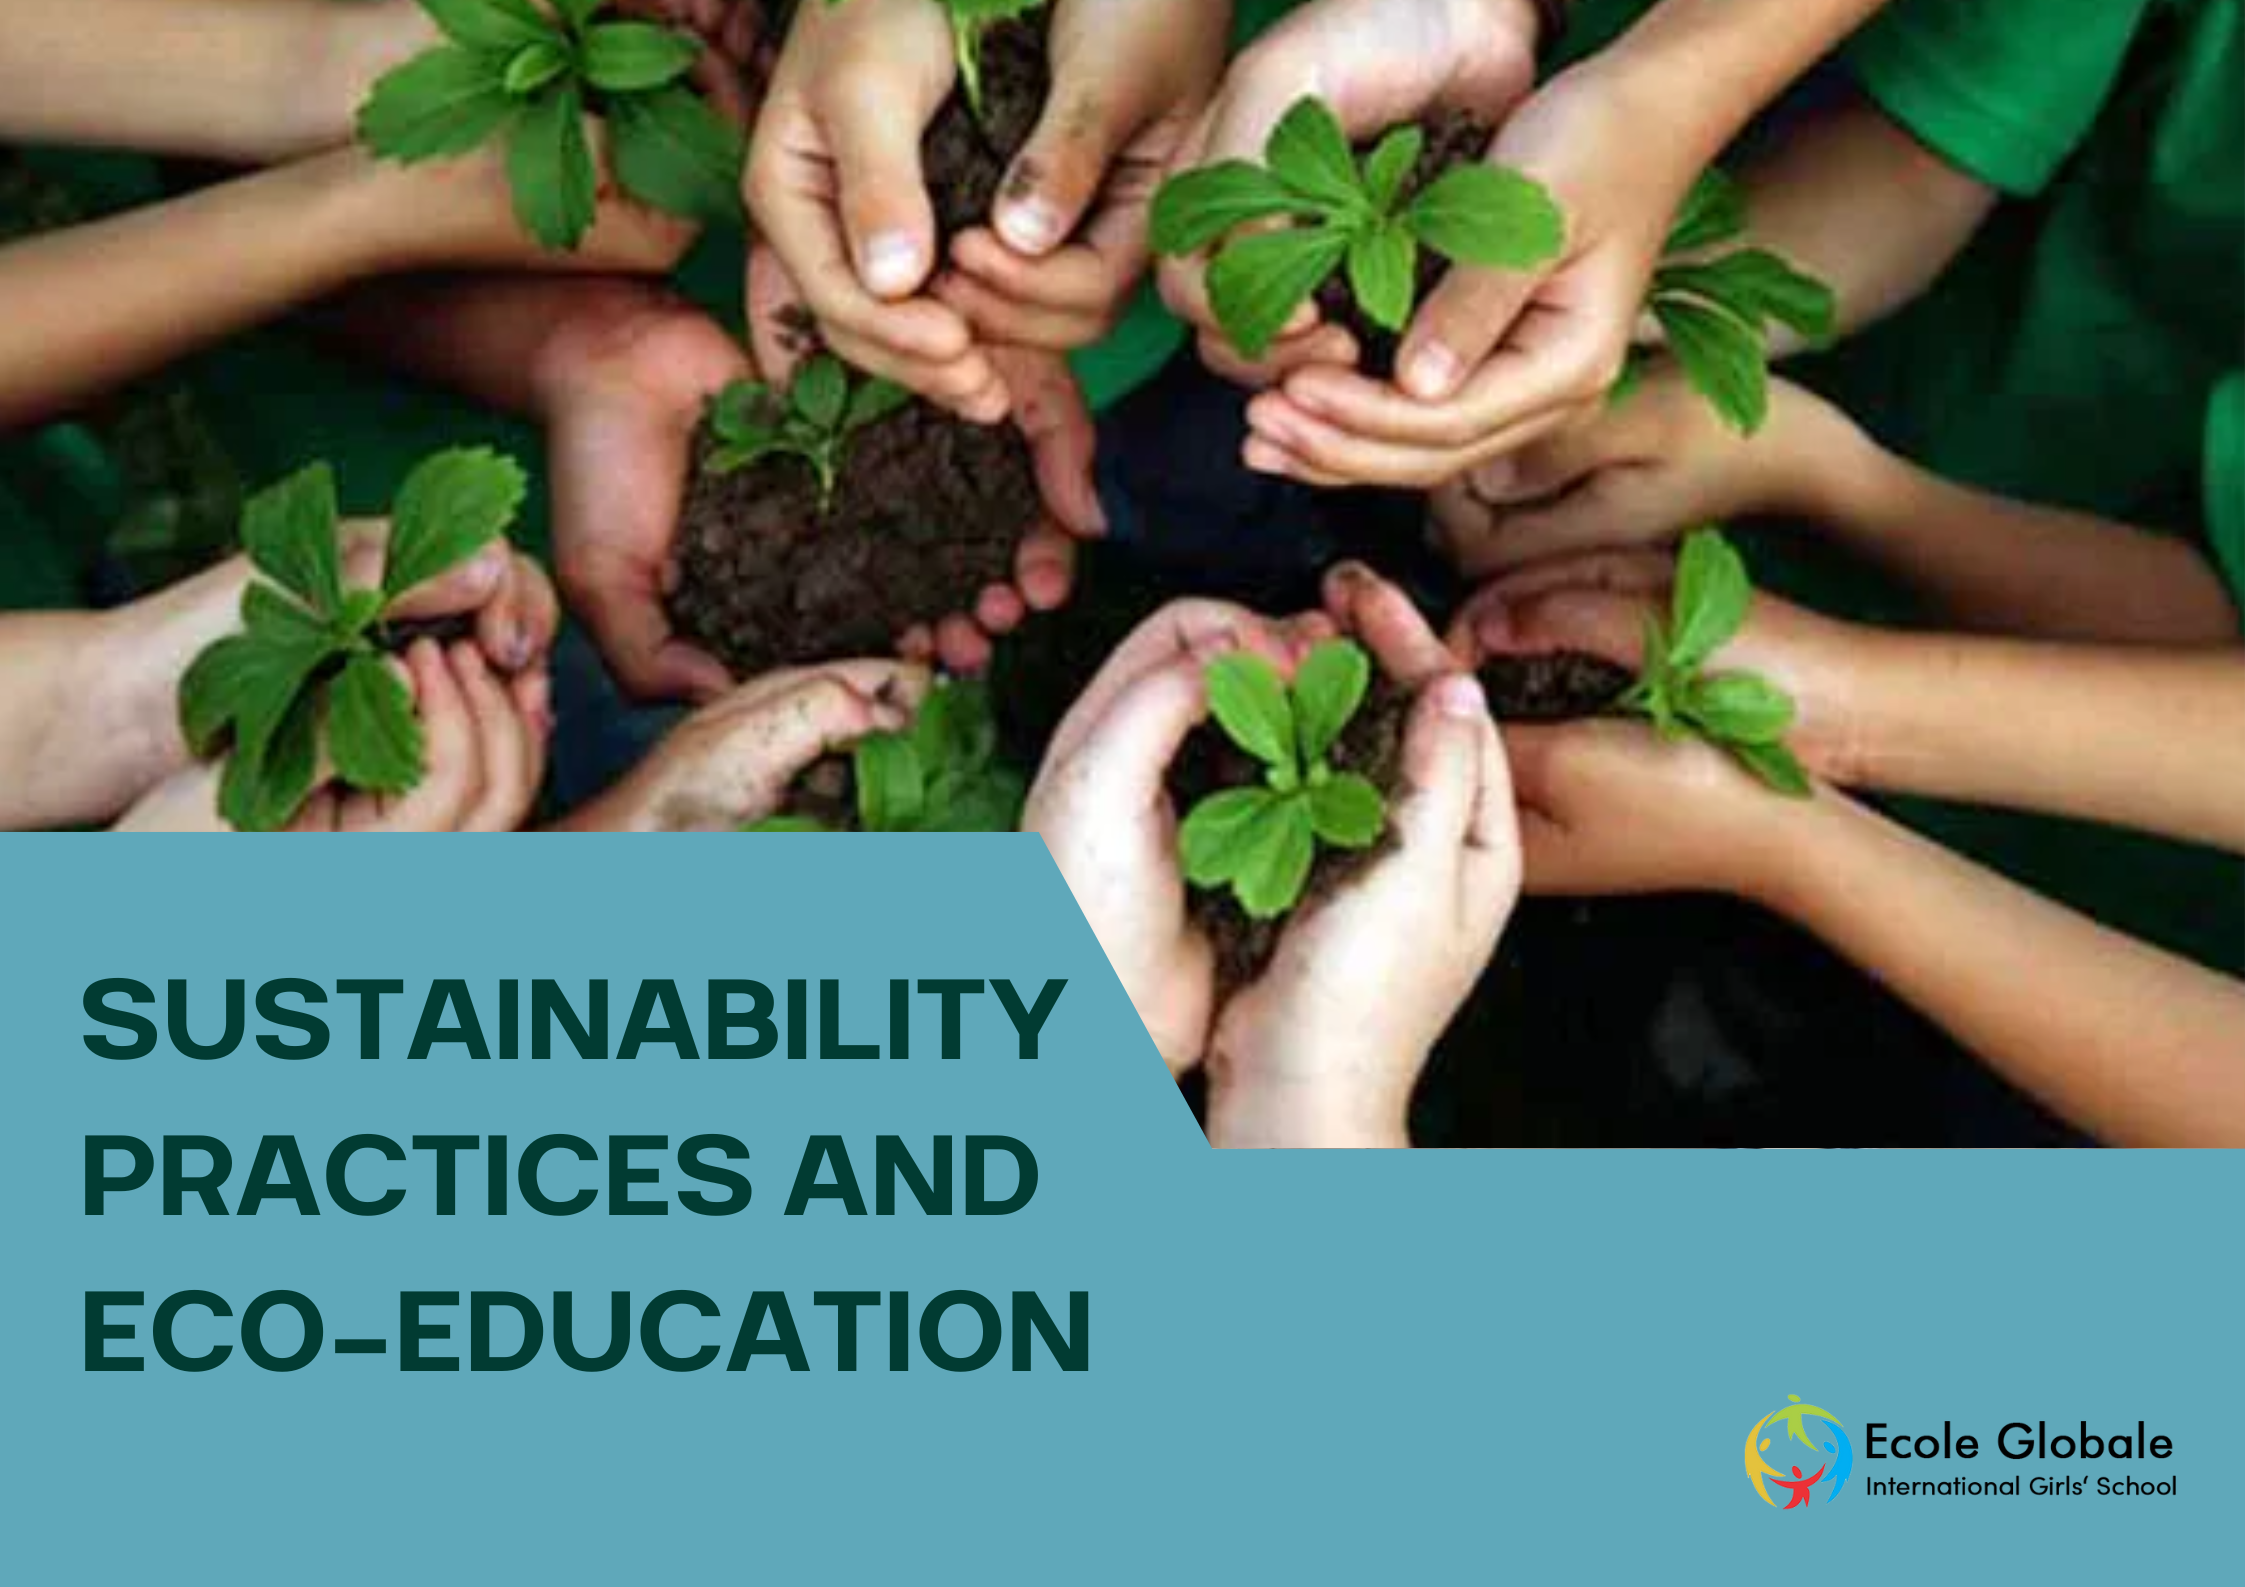 You are currently viewing Green Futures: Sustainability Practices and Eco-Education at Ecole Globale